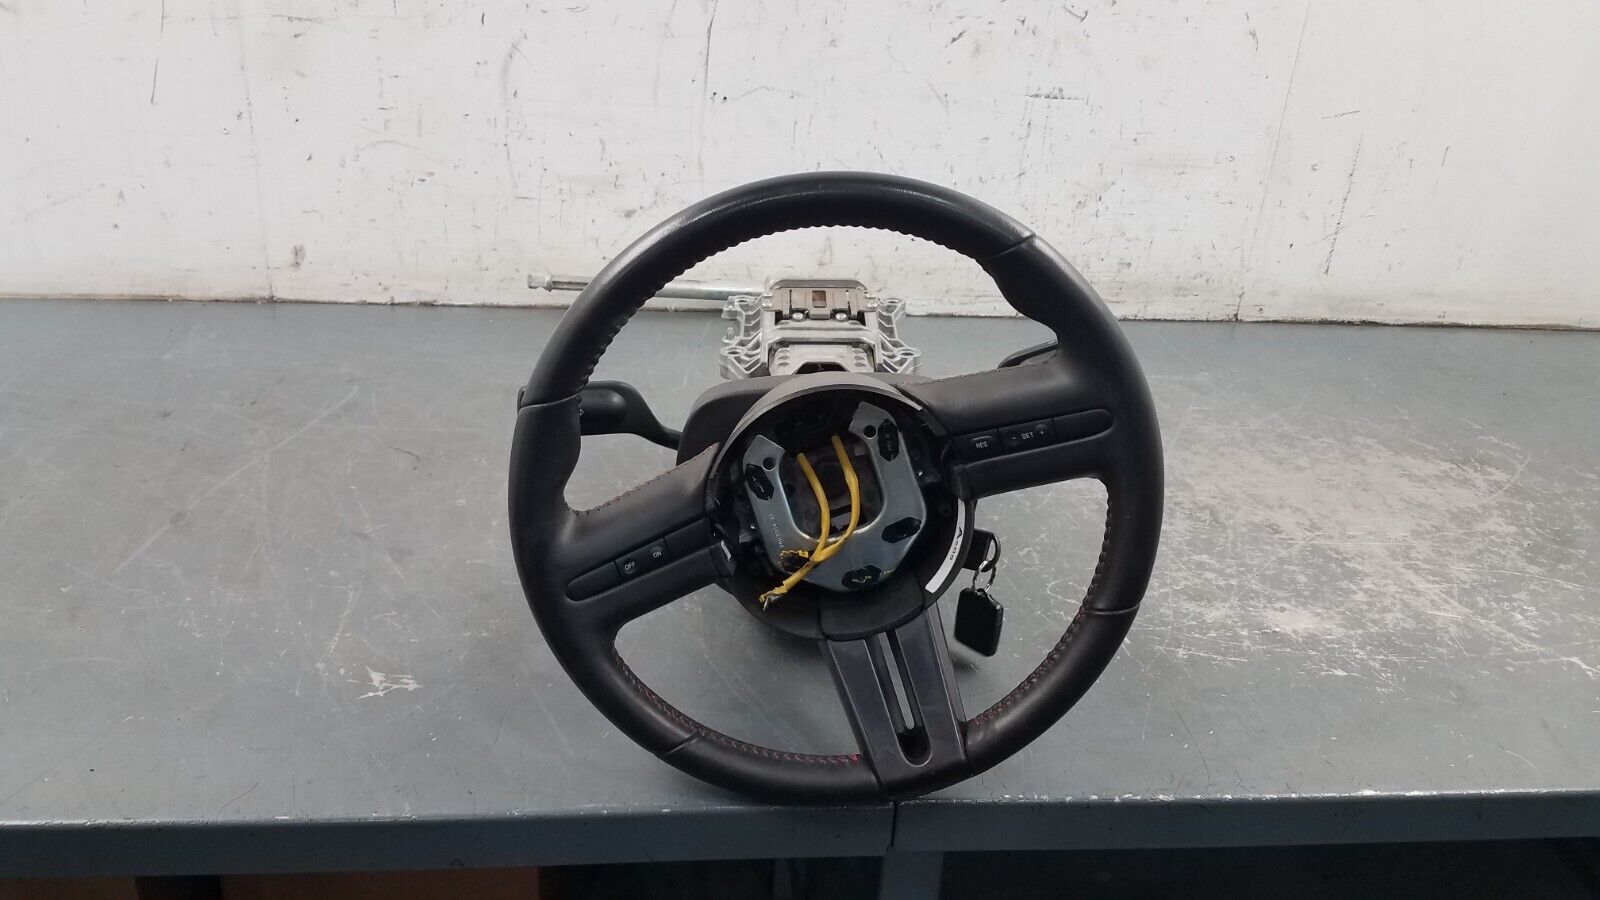 2007 Ford Mustang Shelby GT500 Steering Wheel / Column / Key #8204 P10